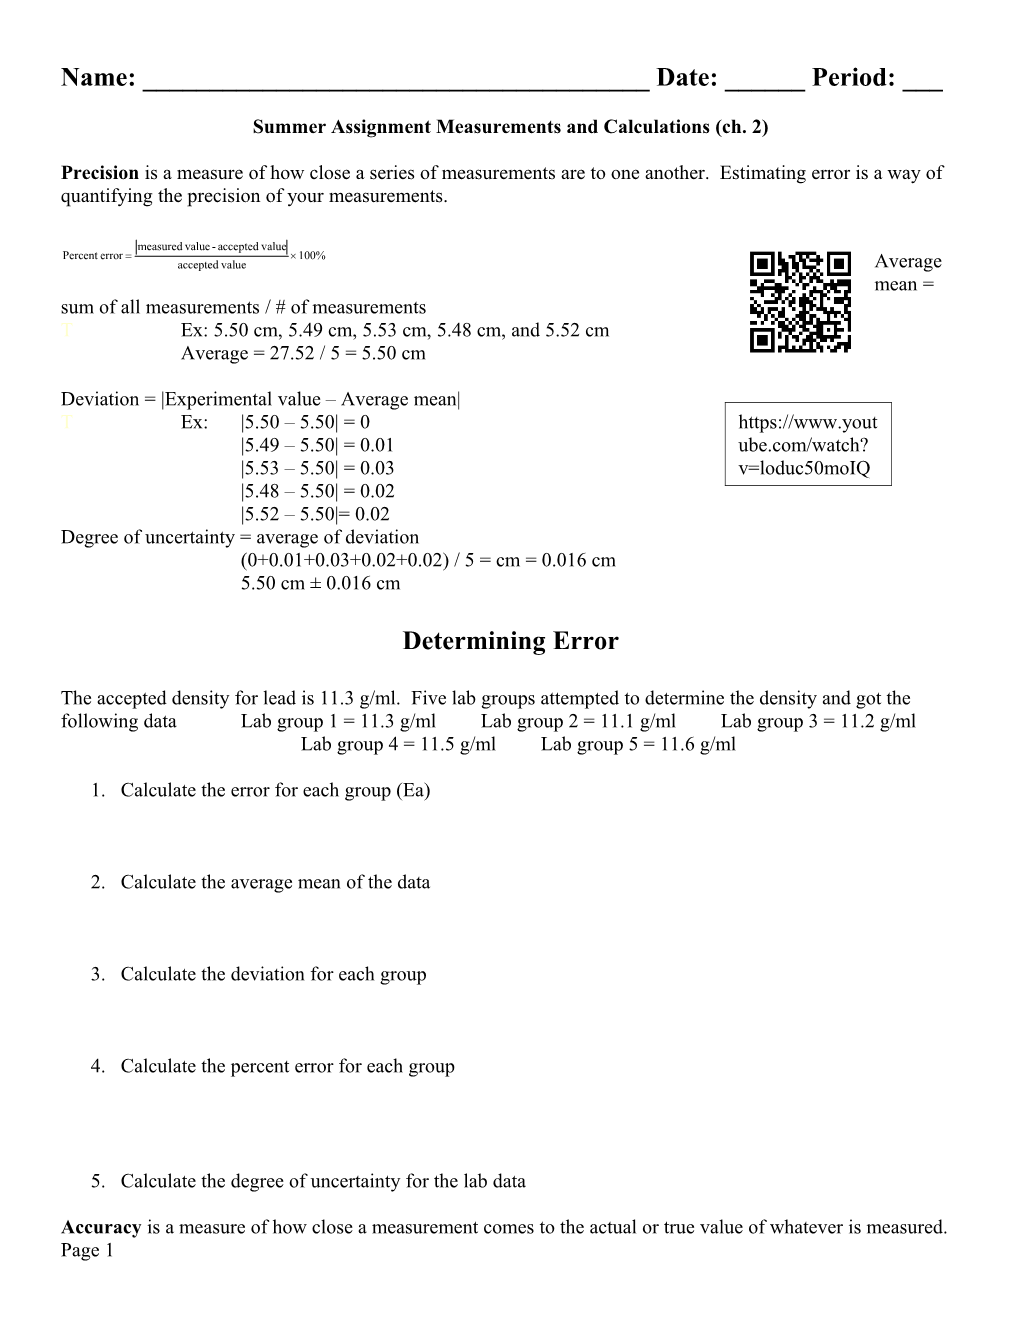 Summer Assignment Measurements and Calculations (Ch. 2)